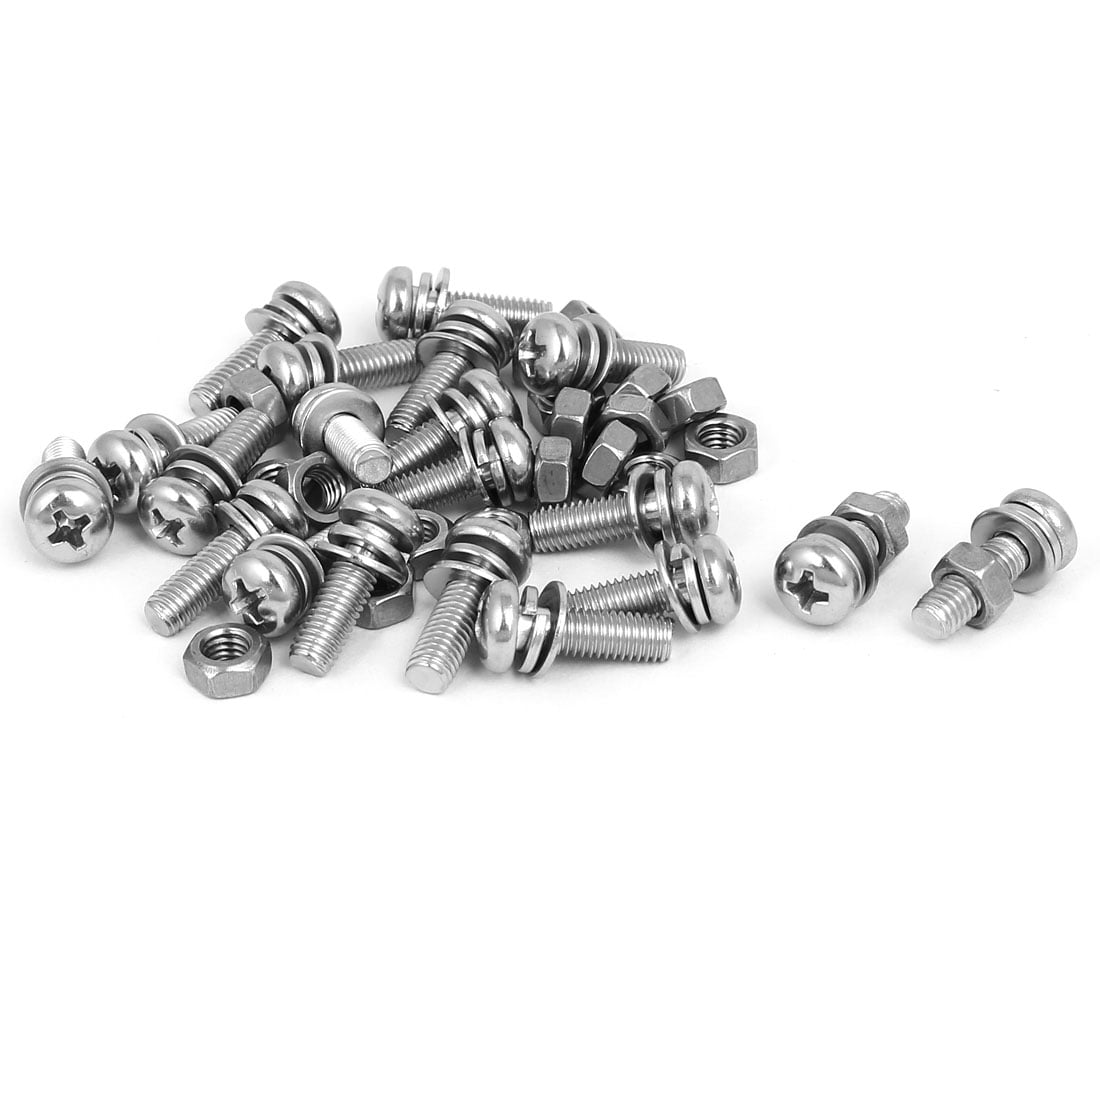 M2 x 16mm 304 Stainless Steel Phillips Pan Head Screws Nuts w Washers 20 Sets 